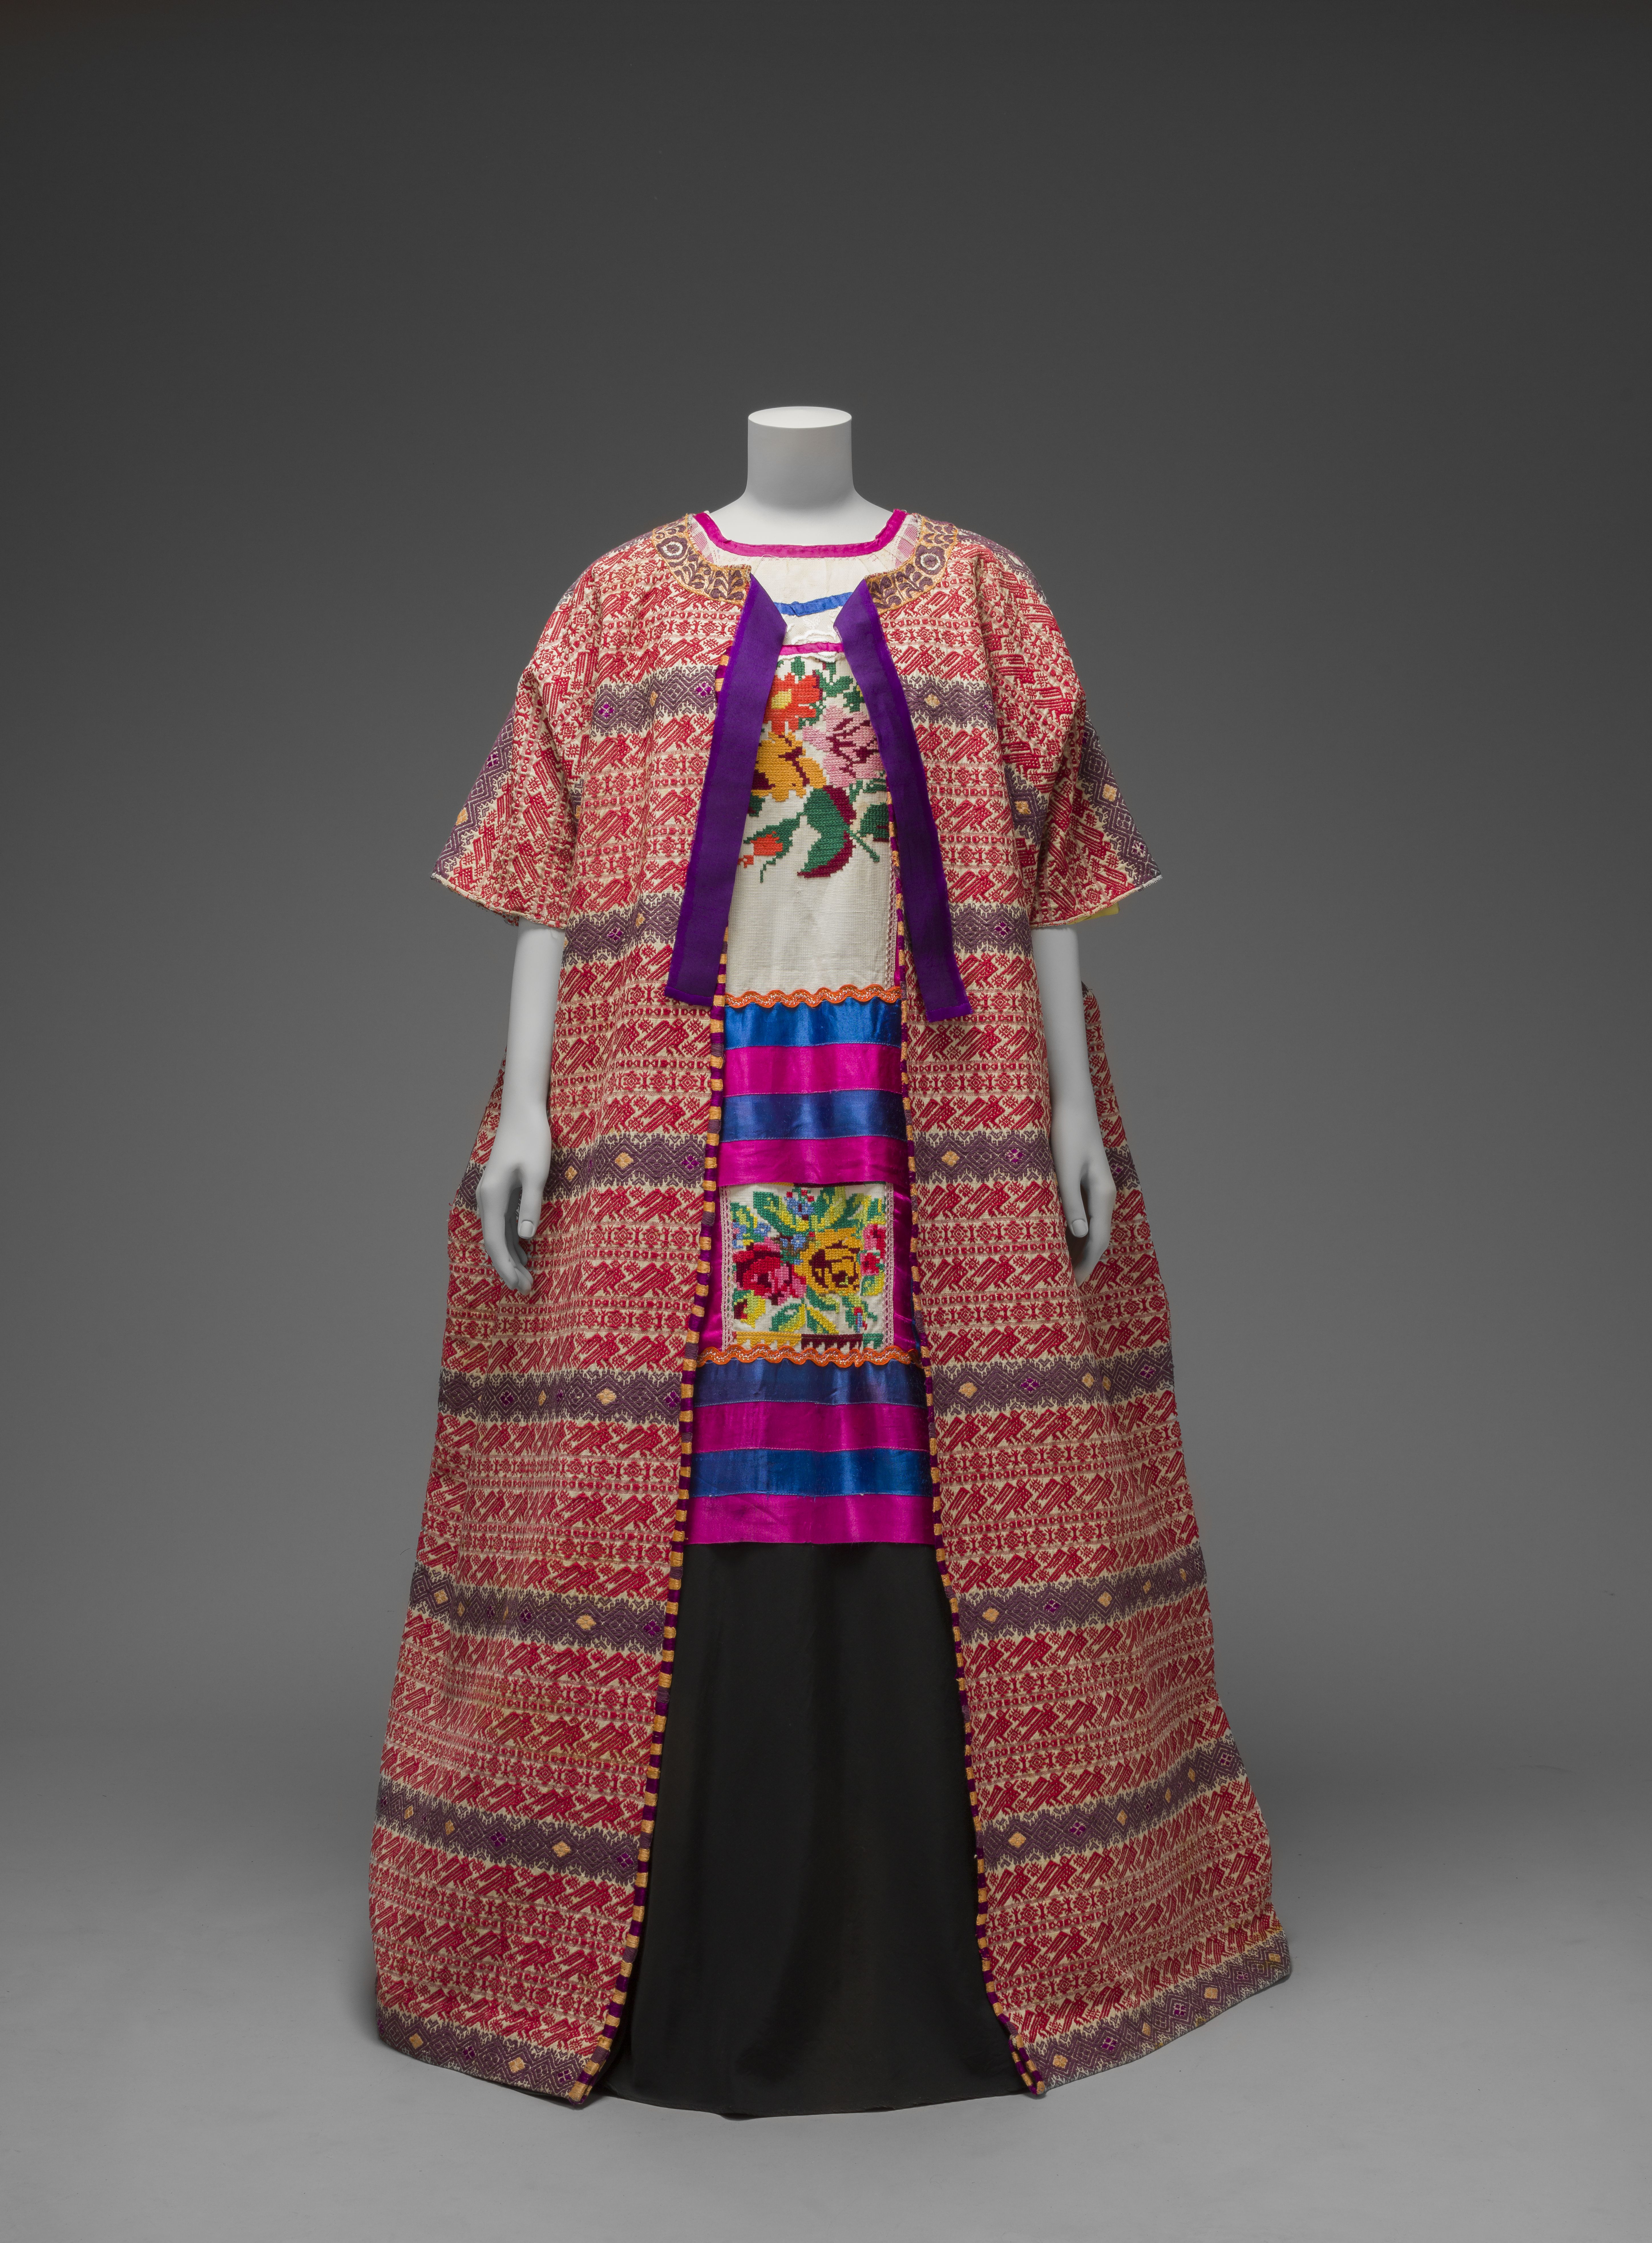 Guatemalan cotton coat worn with Mazatec huipil and plain floor - length skirt Museo Frida Kahlo © Diego Rivera and Frida Kahlo Archives, Banco de México, Fiduciary of  the Trust of the Diego Riviera and Frida Kahlo Museums.